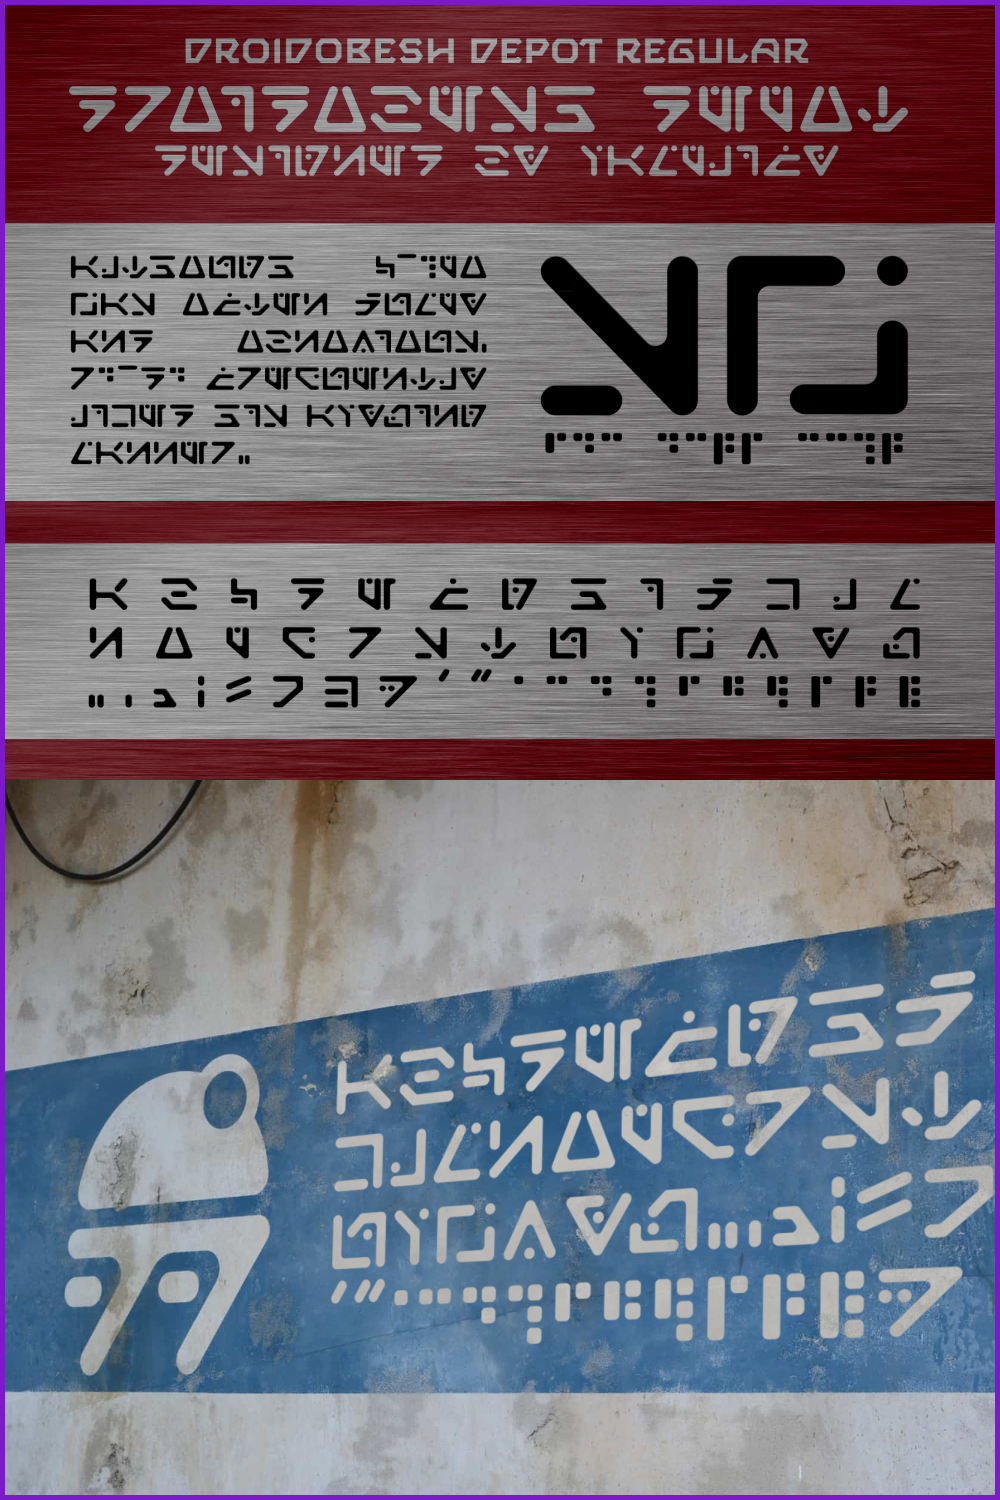 Collage with photos of walls with inscriptions in droid language on a red and blue background.